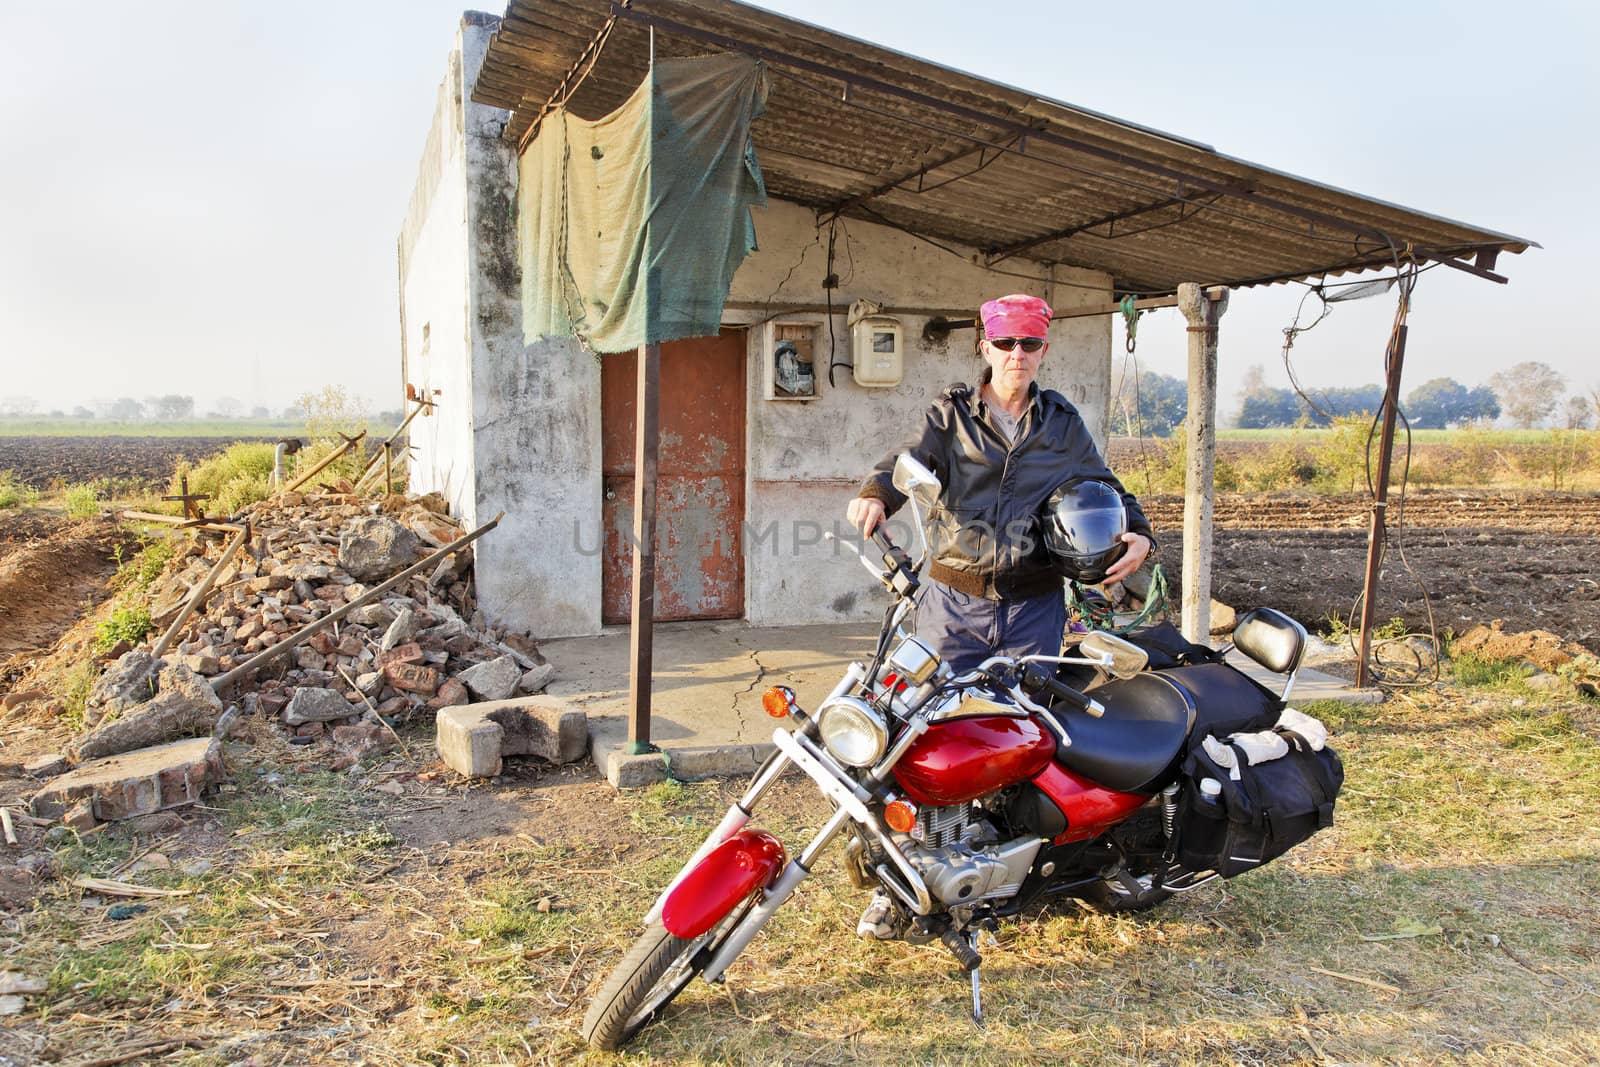 Caucasian motorcycle ride holding a helmet parked outside a rural hut earing a red bandanna